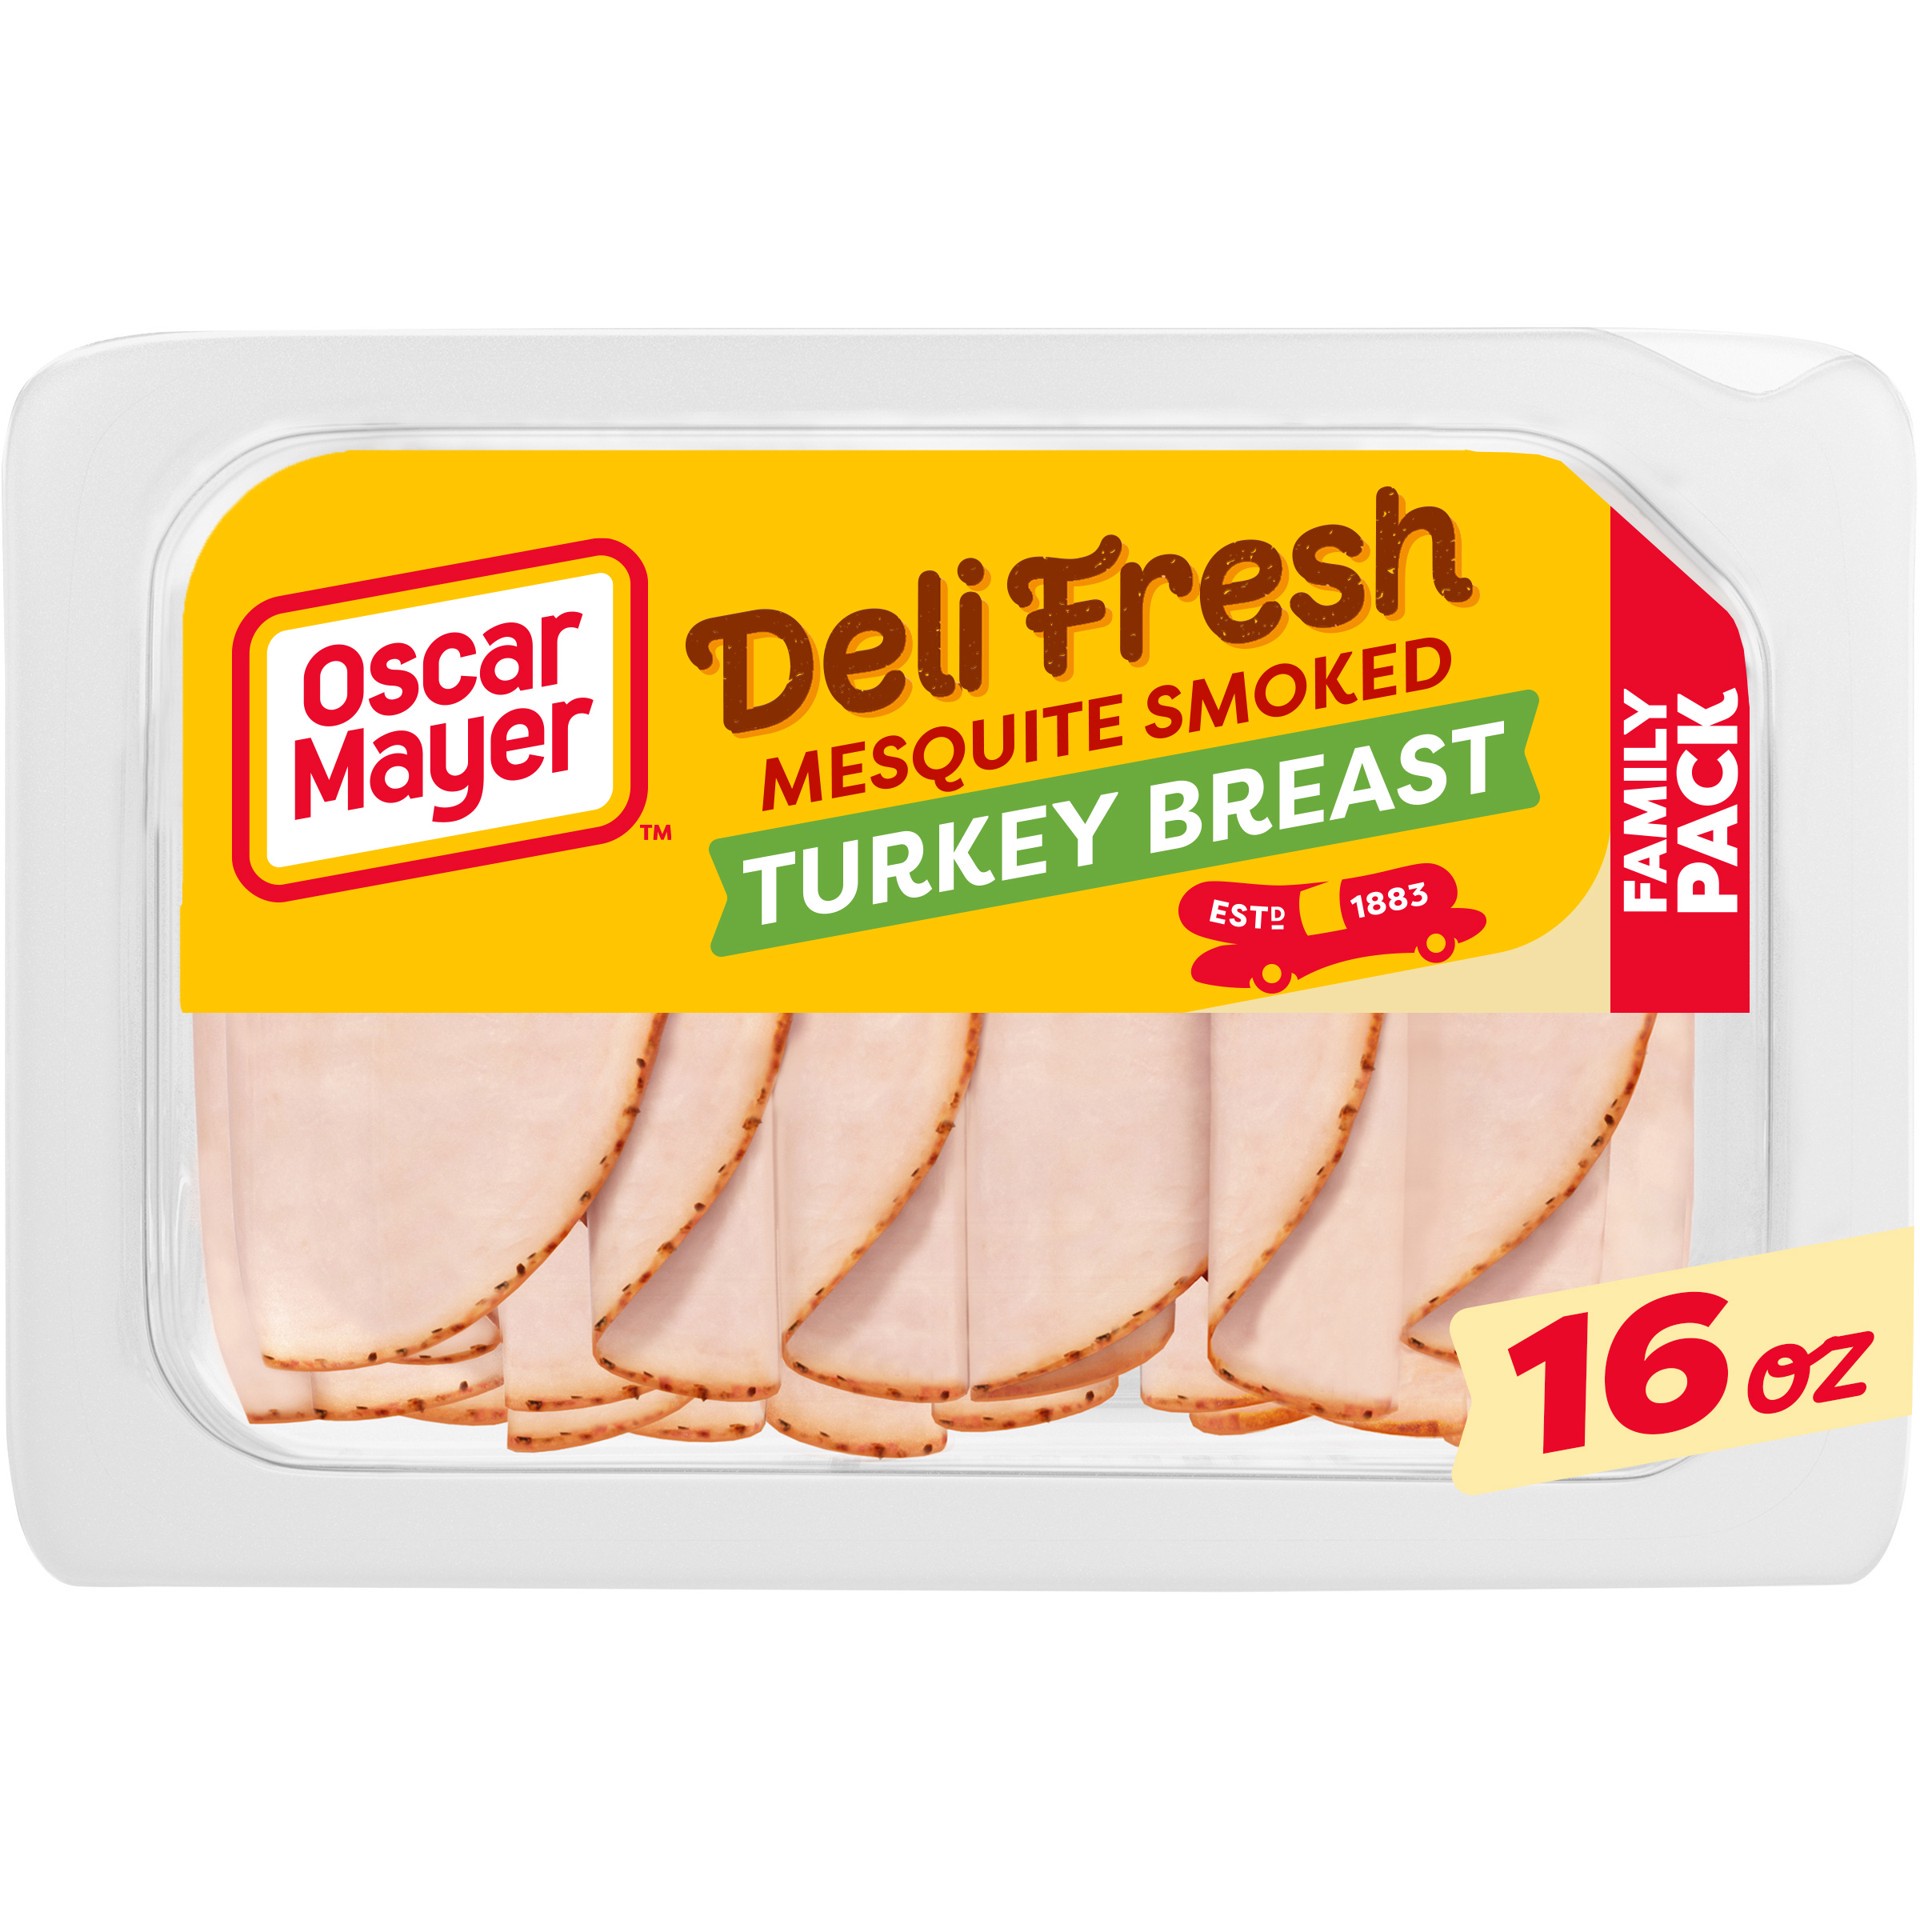 slide 1 of 9, Oscar Mayer Deli Fresh Mesquite Smoked Turkey Breast Sliced Lunch Meat Family Size - 16oz, 